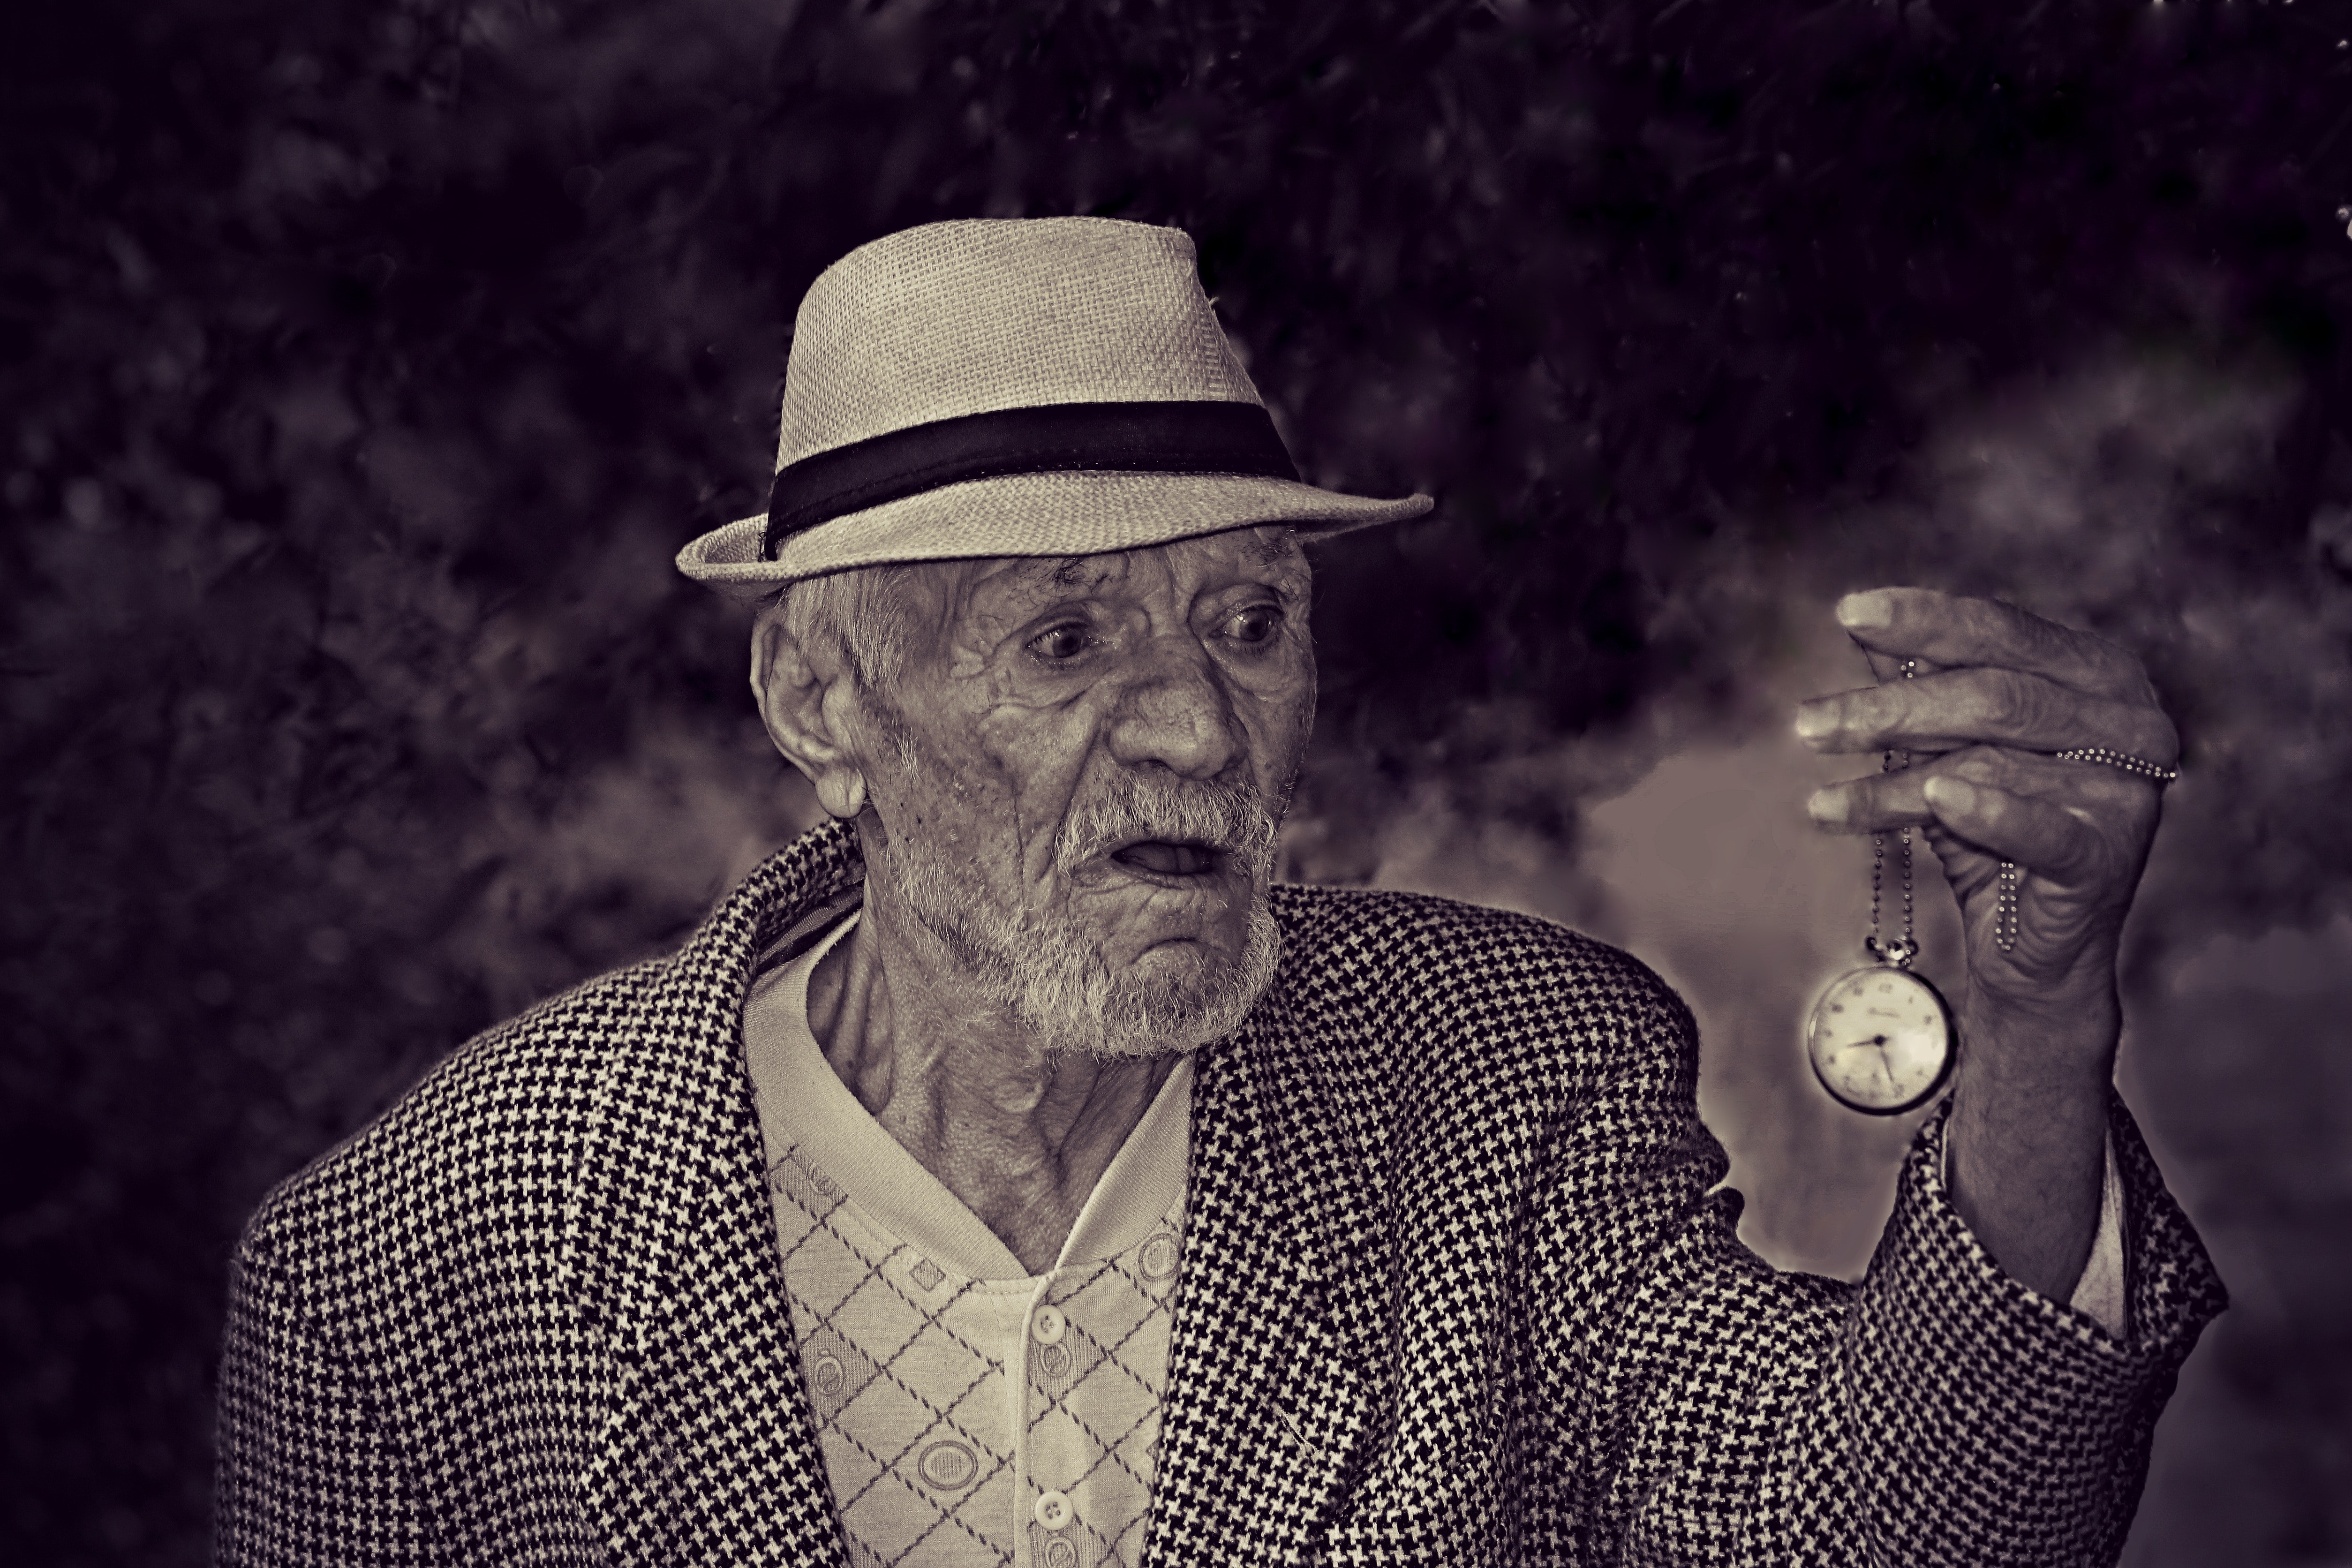 Man holding pocket watch in grayscale photo